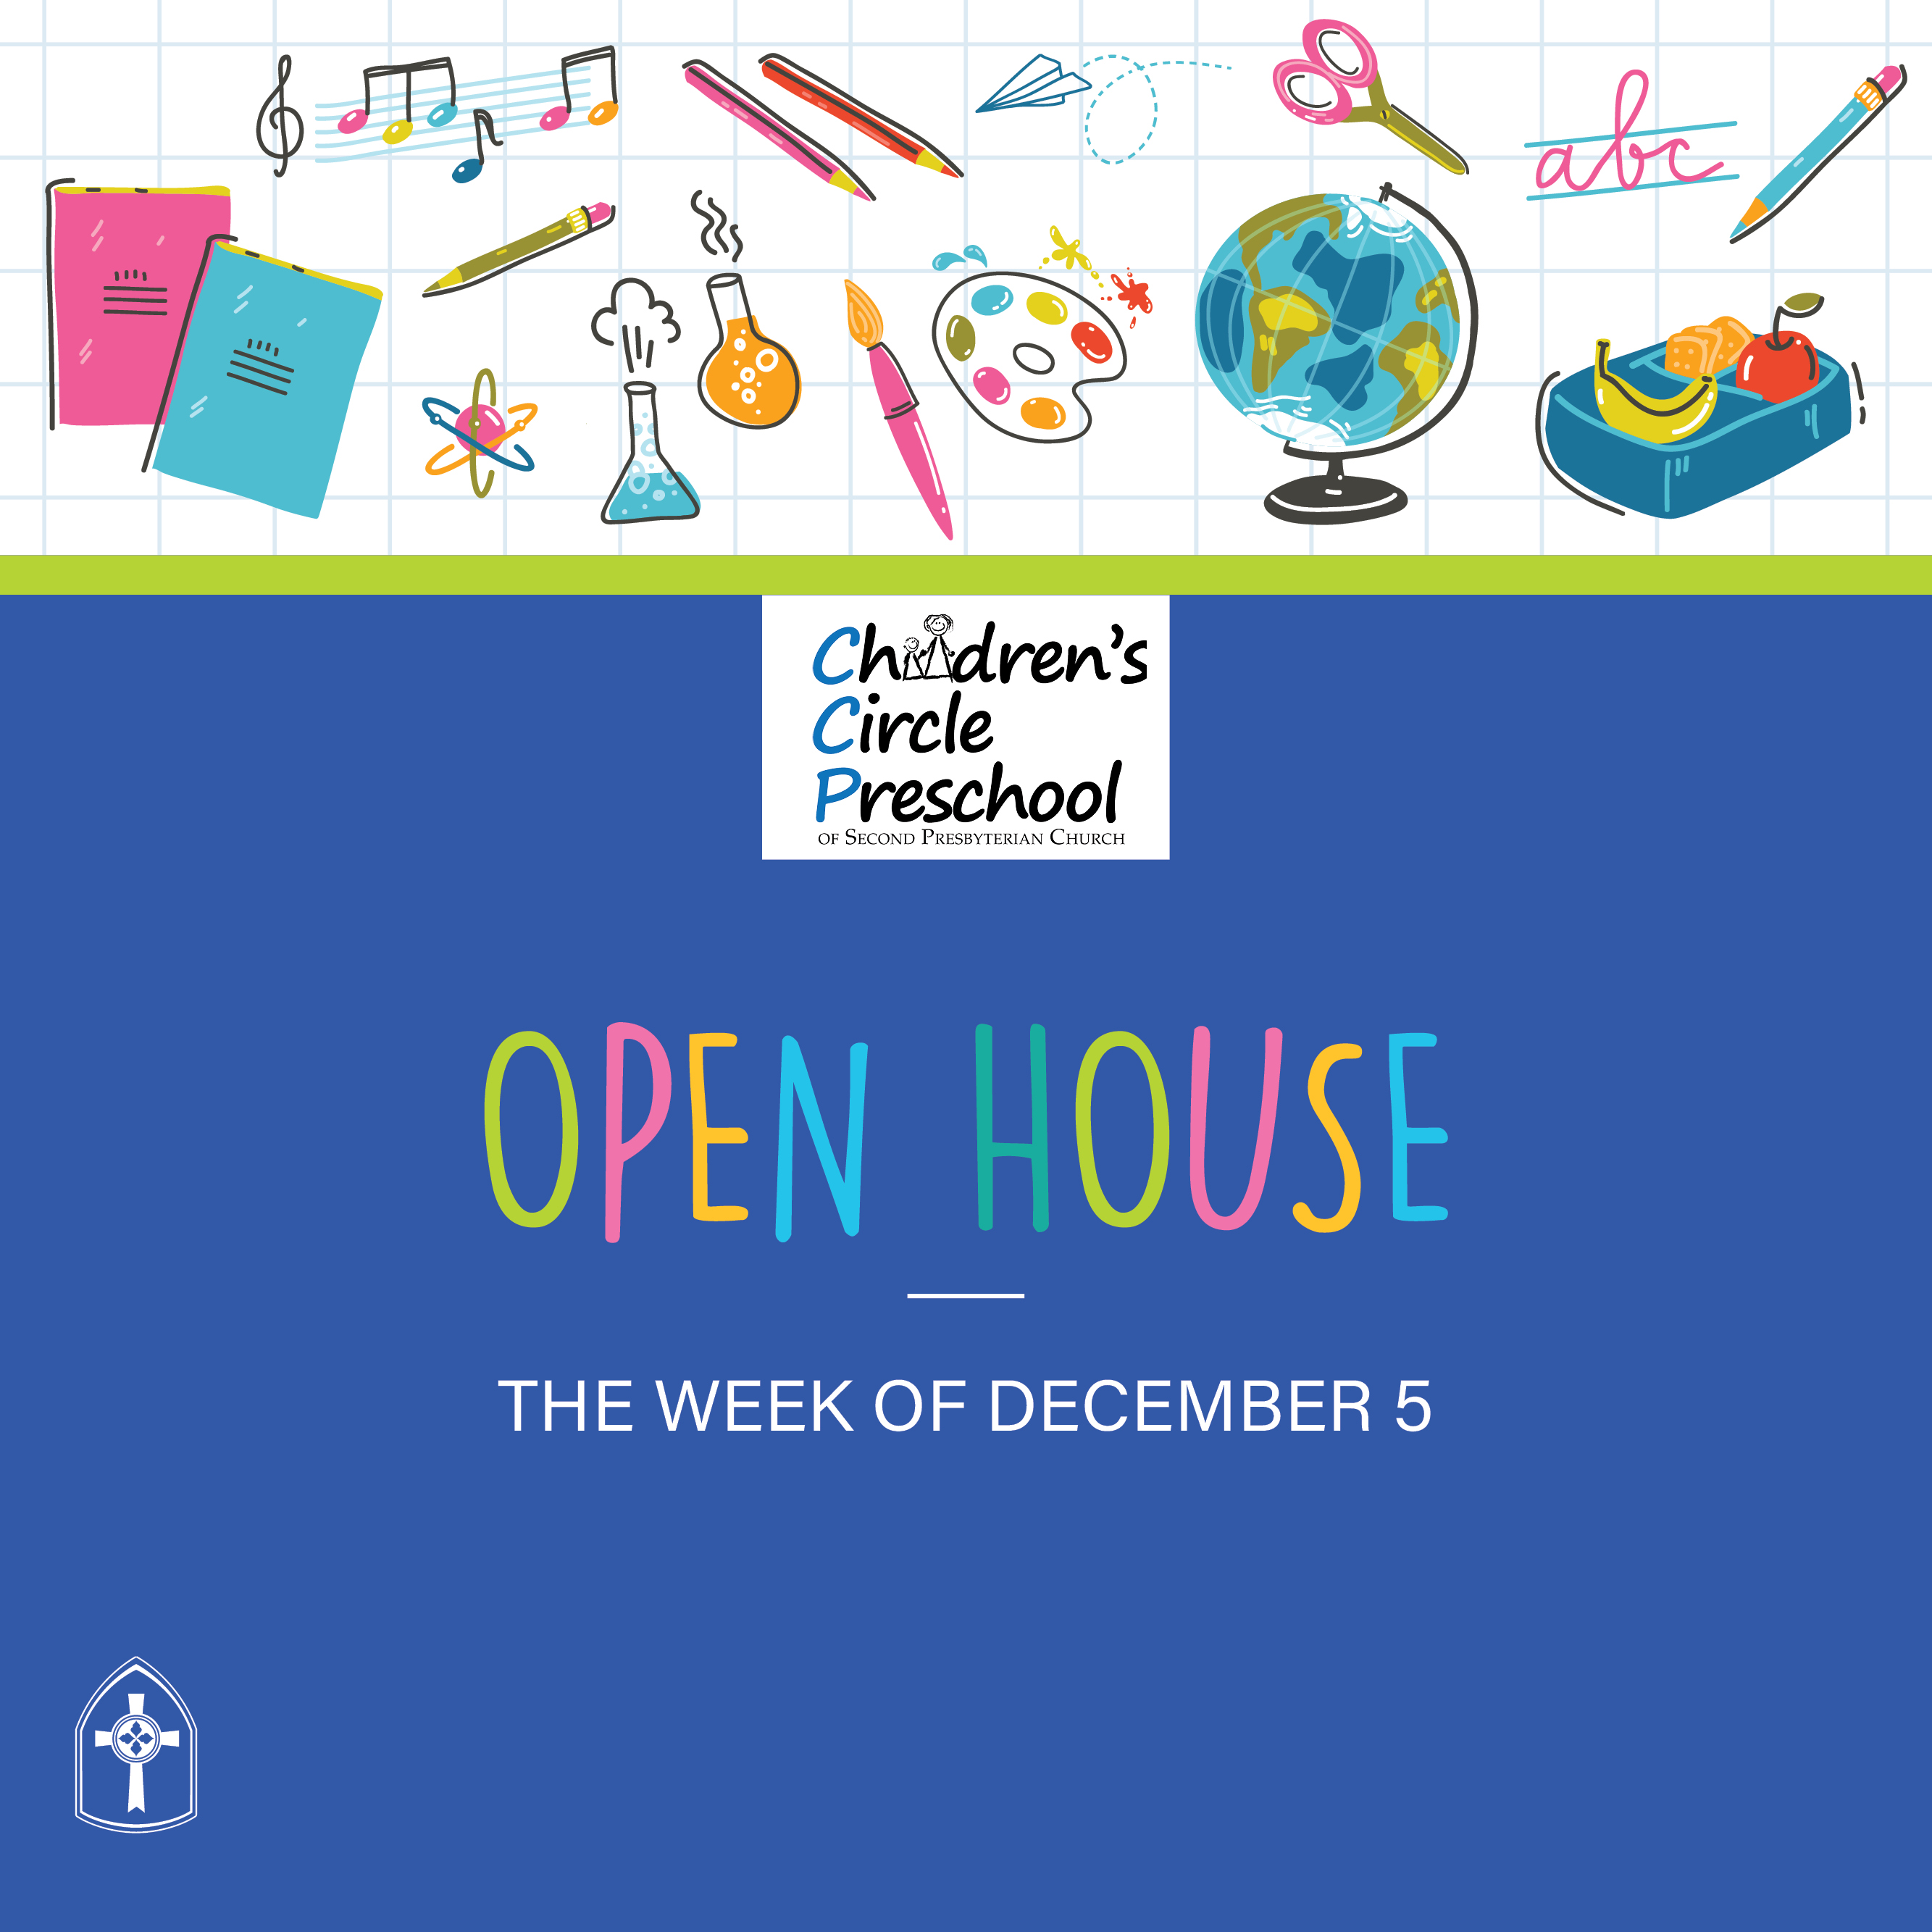 Children's Circle Preschool
Registration coming soon -- Plan your tour now!
ChildrensCircle.org

Come see how CCP provides a nurturing environment for children to learn, play, and hear God’s Word. We will host tours for Second Church members throughout the week of December 5. Learn more.
